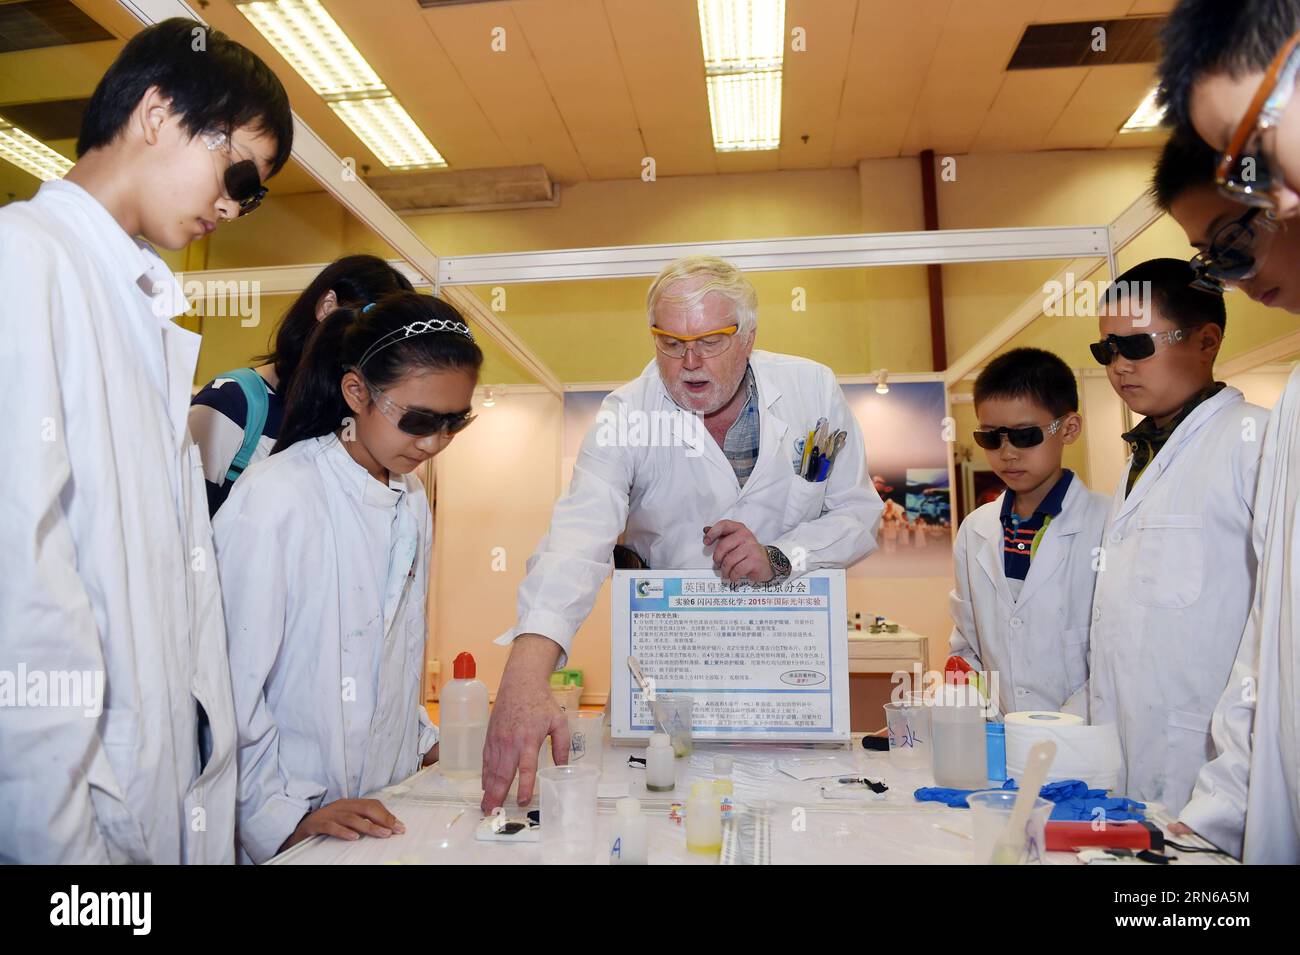 (150717) -- BEIJING, July 17, 2015 -- A scientist from the Beijing office of Britain s Royal Society of Chemistry helps children to do experiments at the 2015 China Science Festival in Beijing, China, July 17, 2015. The 2015 China Science Festival kicked off in Beijing Exhibition Center on Friday, attracting 125 organizations, institutes and enterprises from 12 countries and regions. The theme of the festival is light and color. ) (zhs) CHINA-BEIJING-SCIENCE FESTIVAL (CN) ChenxYehua PUBLICATIONxNOTxINxCHN   150717 Beijing July 17 2015 a Scientist from The Beijing Office of Britain S Royal Soci Stock Photo